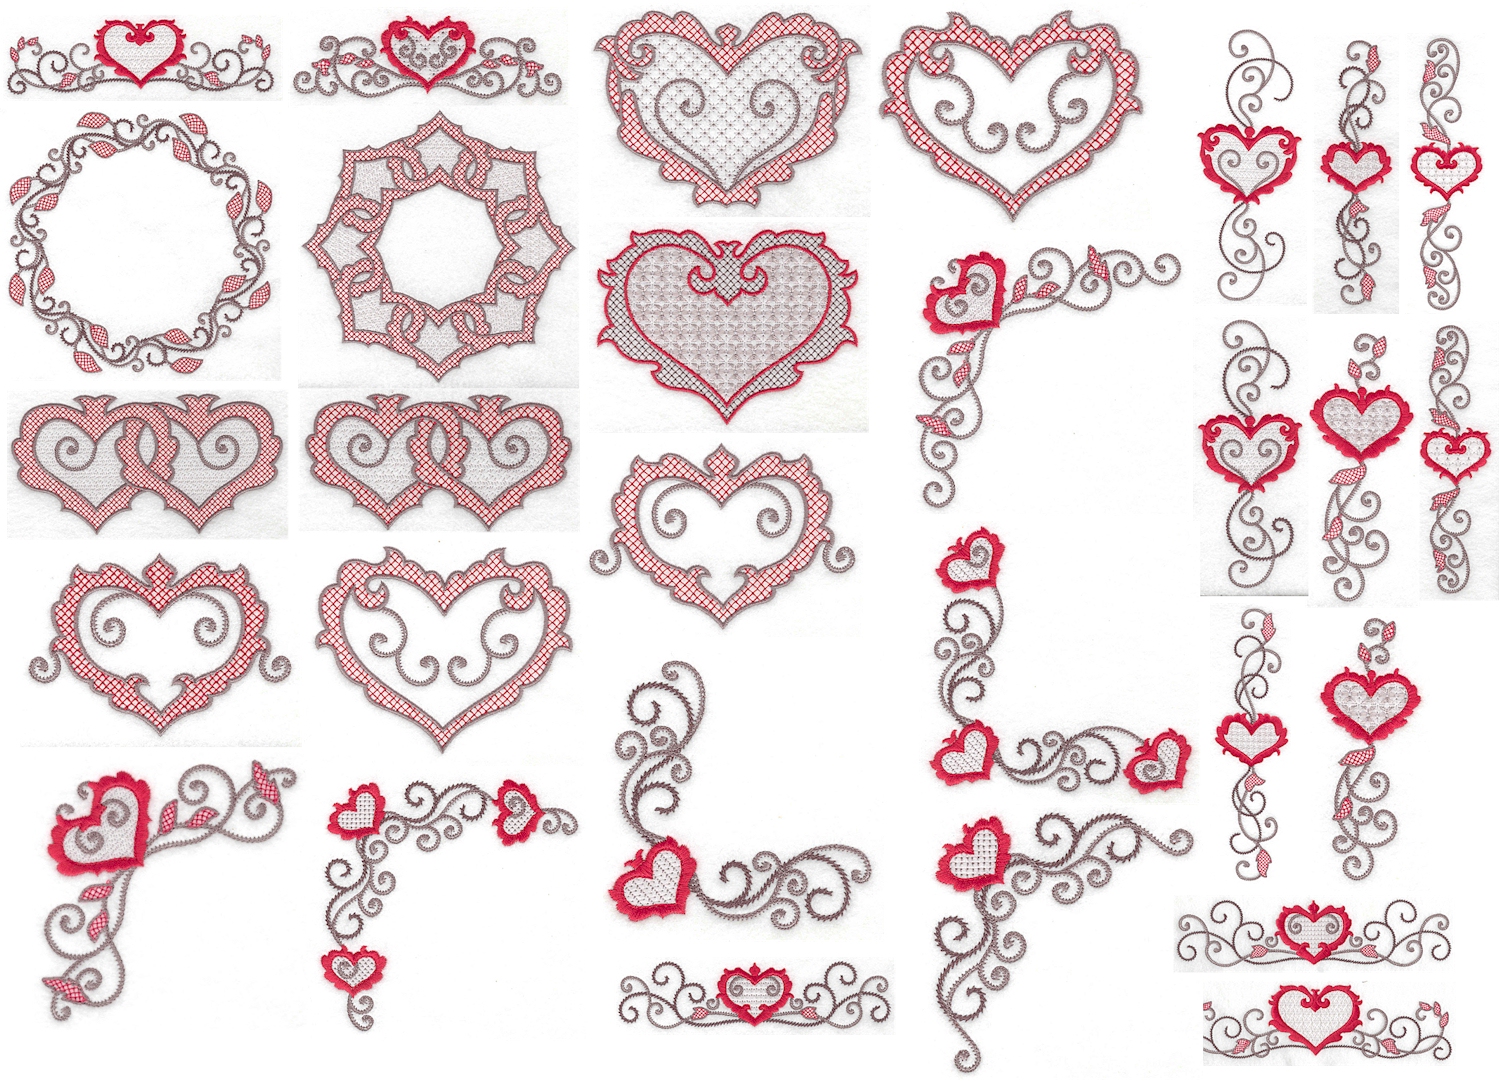 Floral Hearts Embroidery Designs by John Deer's Adorable Ideas - Multi-Format CD-ROM